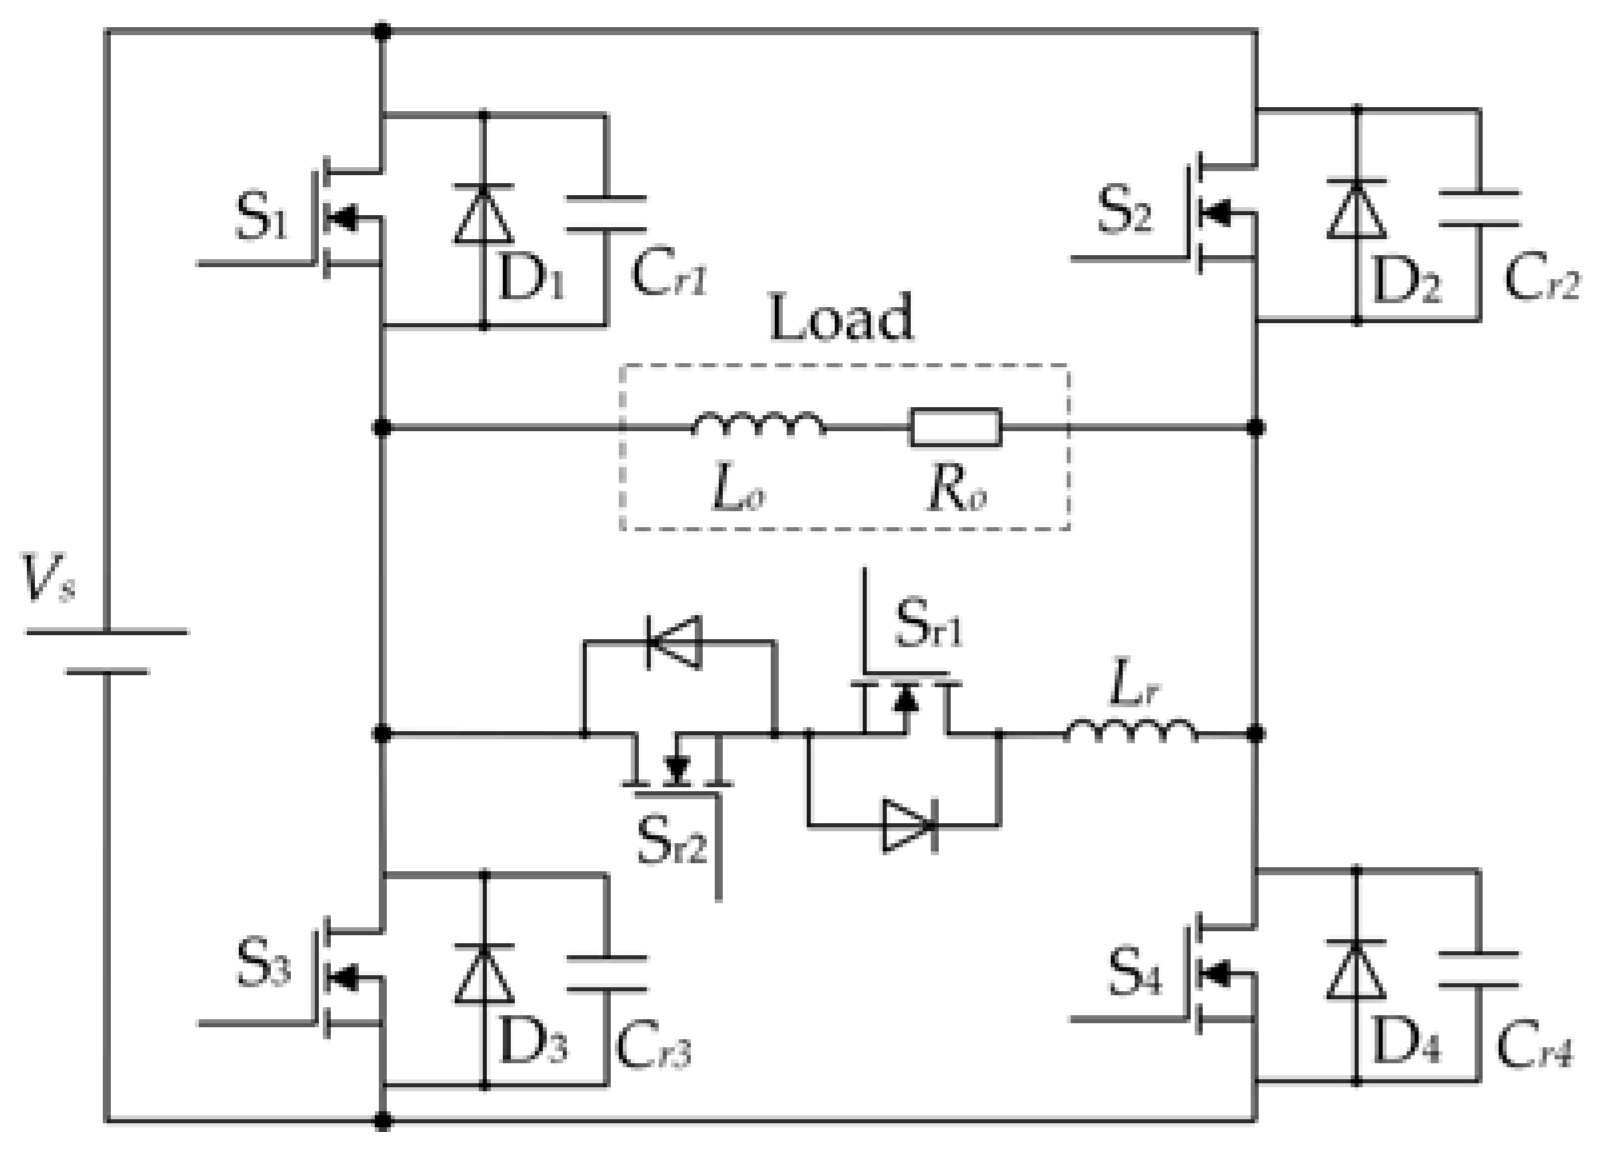 Energies | Free Full-Text | A High-Precision Control for a ZVT PWM Soft-Switching  Inverter to Eliminate the Dead-Time Effect